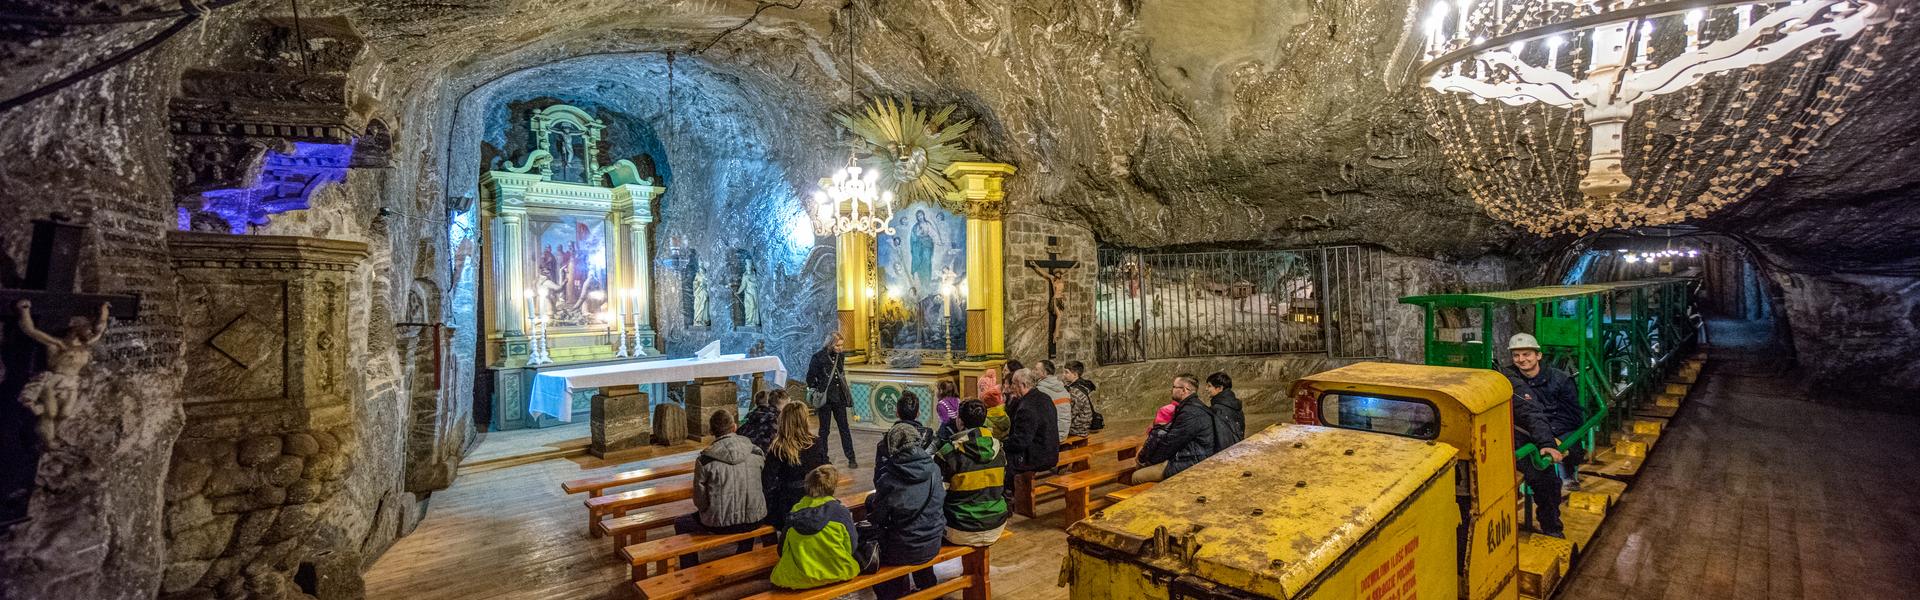 Saint Kinga’s Chapel, tourists listening to a guide’s story and an underground train in the Bochnia Salt Mine.